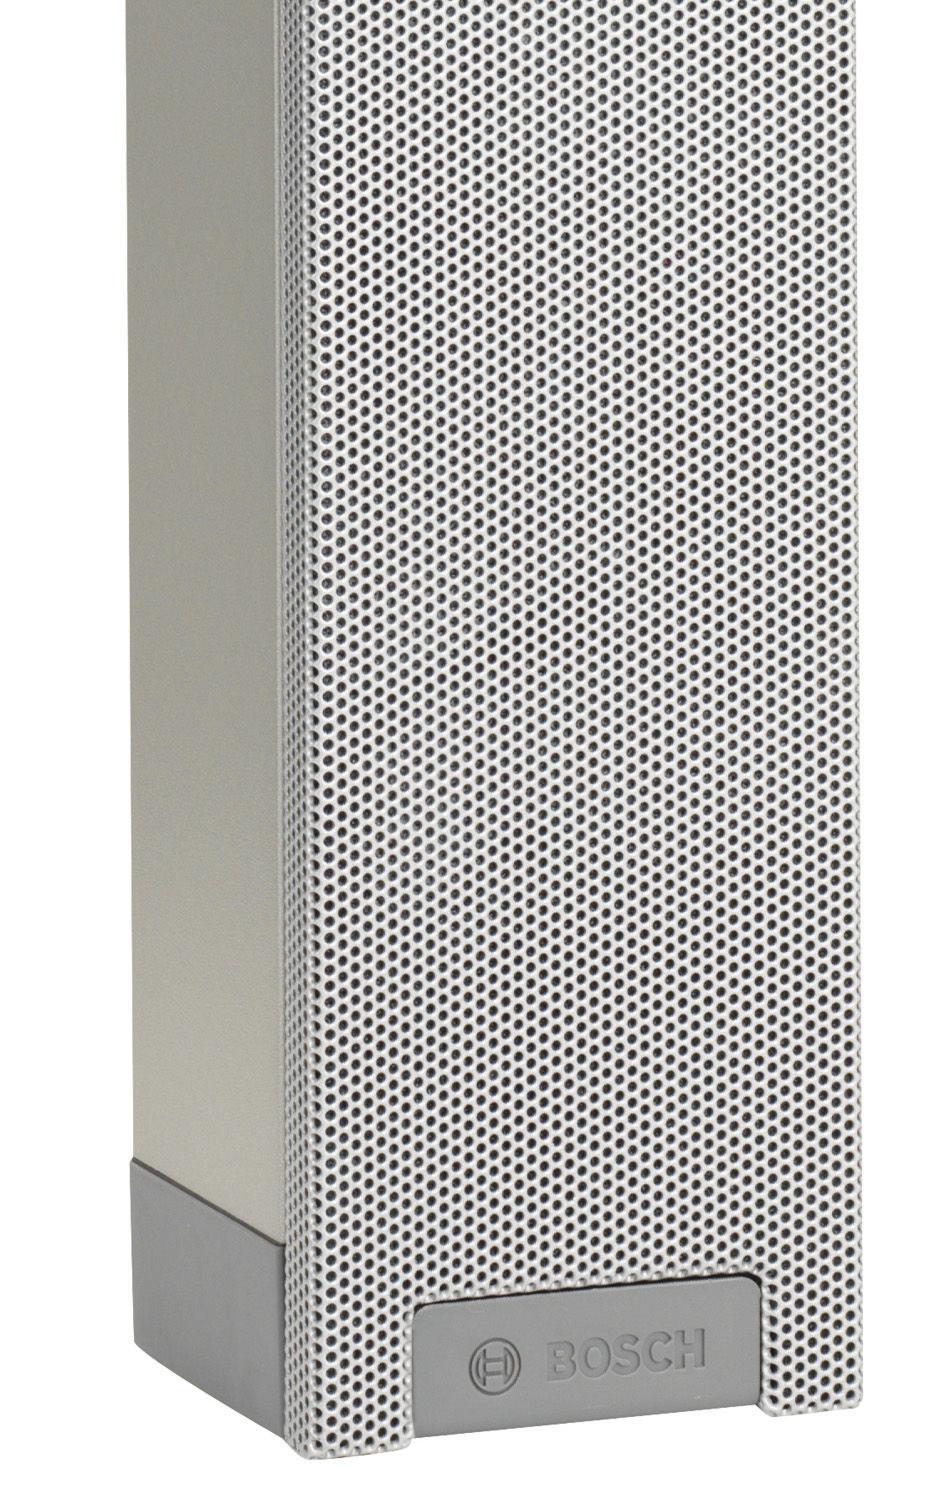 Commnications Systems LBC3200/00 Line array lodspeaker, 30W LBC3200/00 Line array lodspeaker, 30W www.boschsecrity.